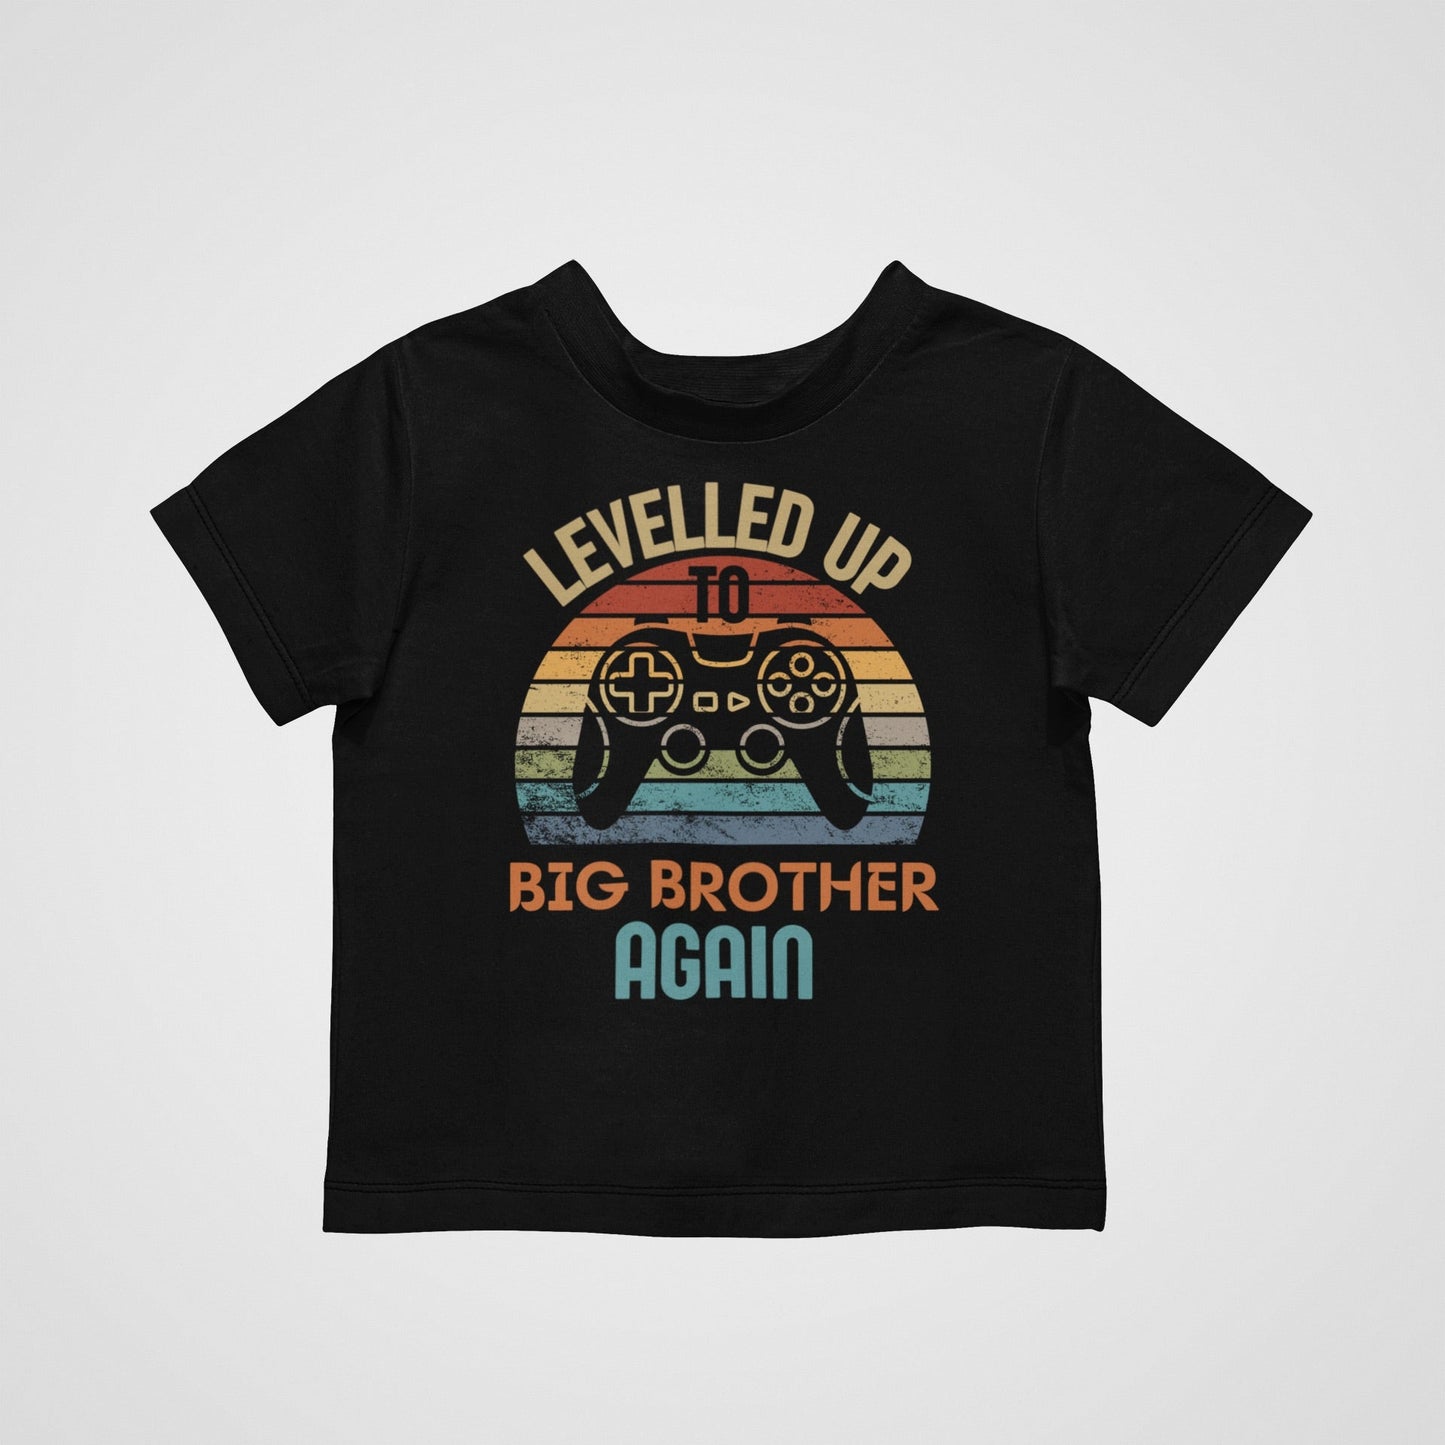 Levelled up to big brother again - Gamer - Three2Tango Tee's